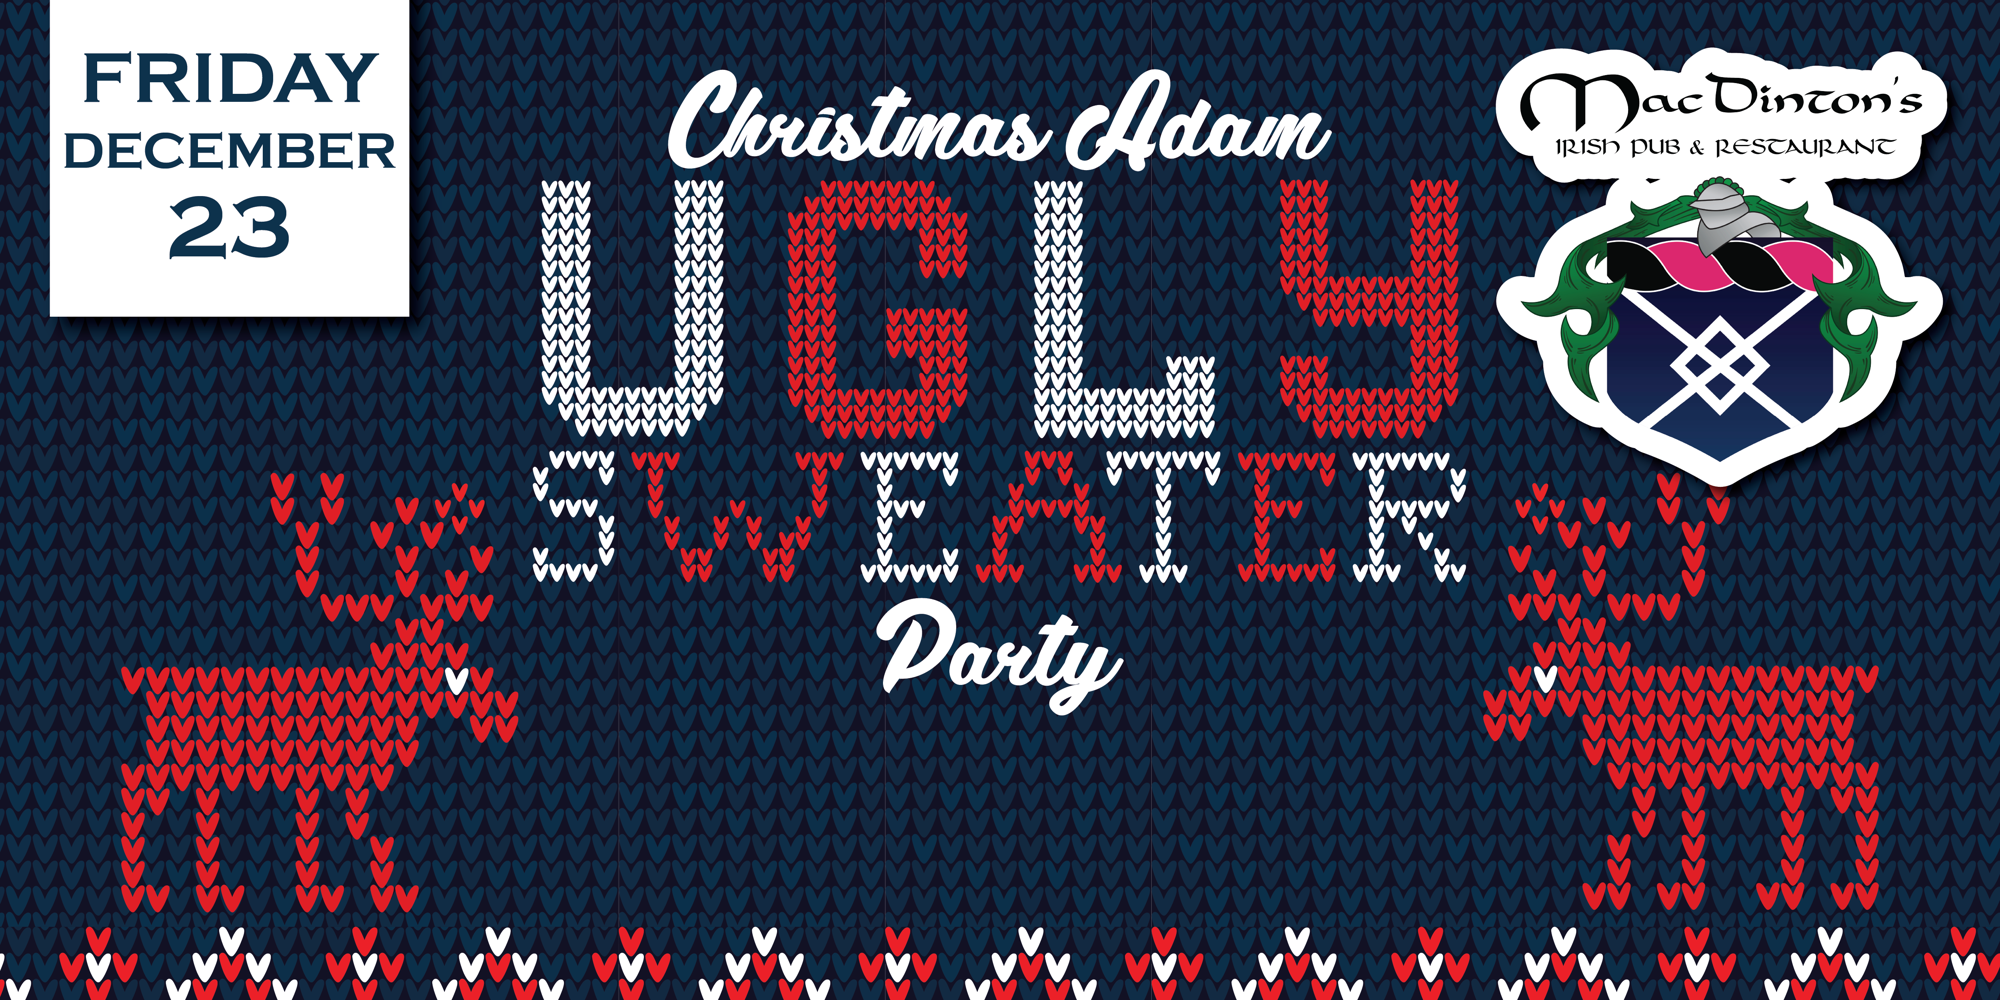 Christmas Adam Ugly Sweater Party! promotional image